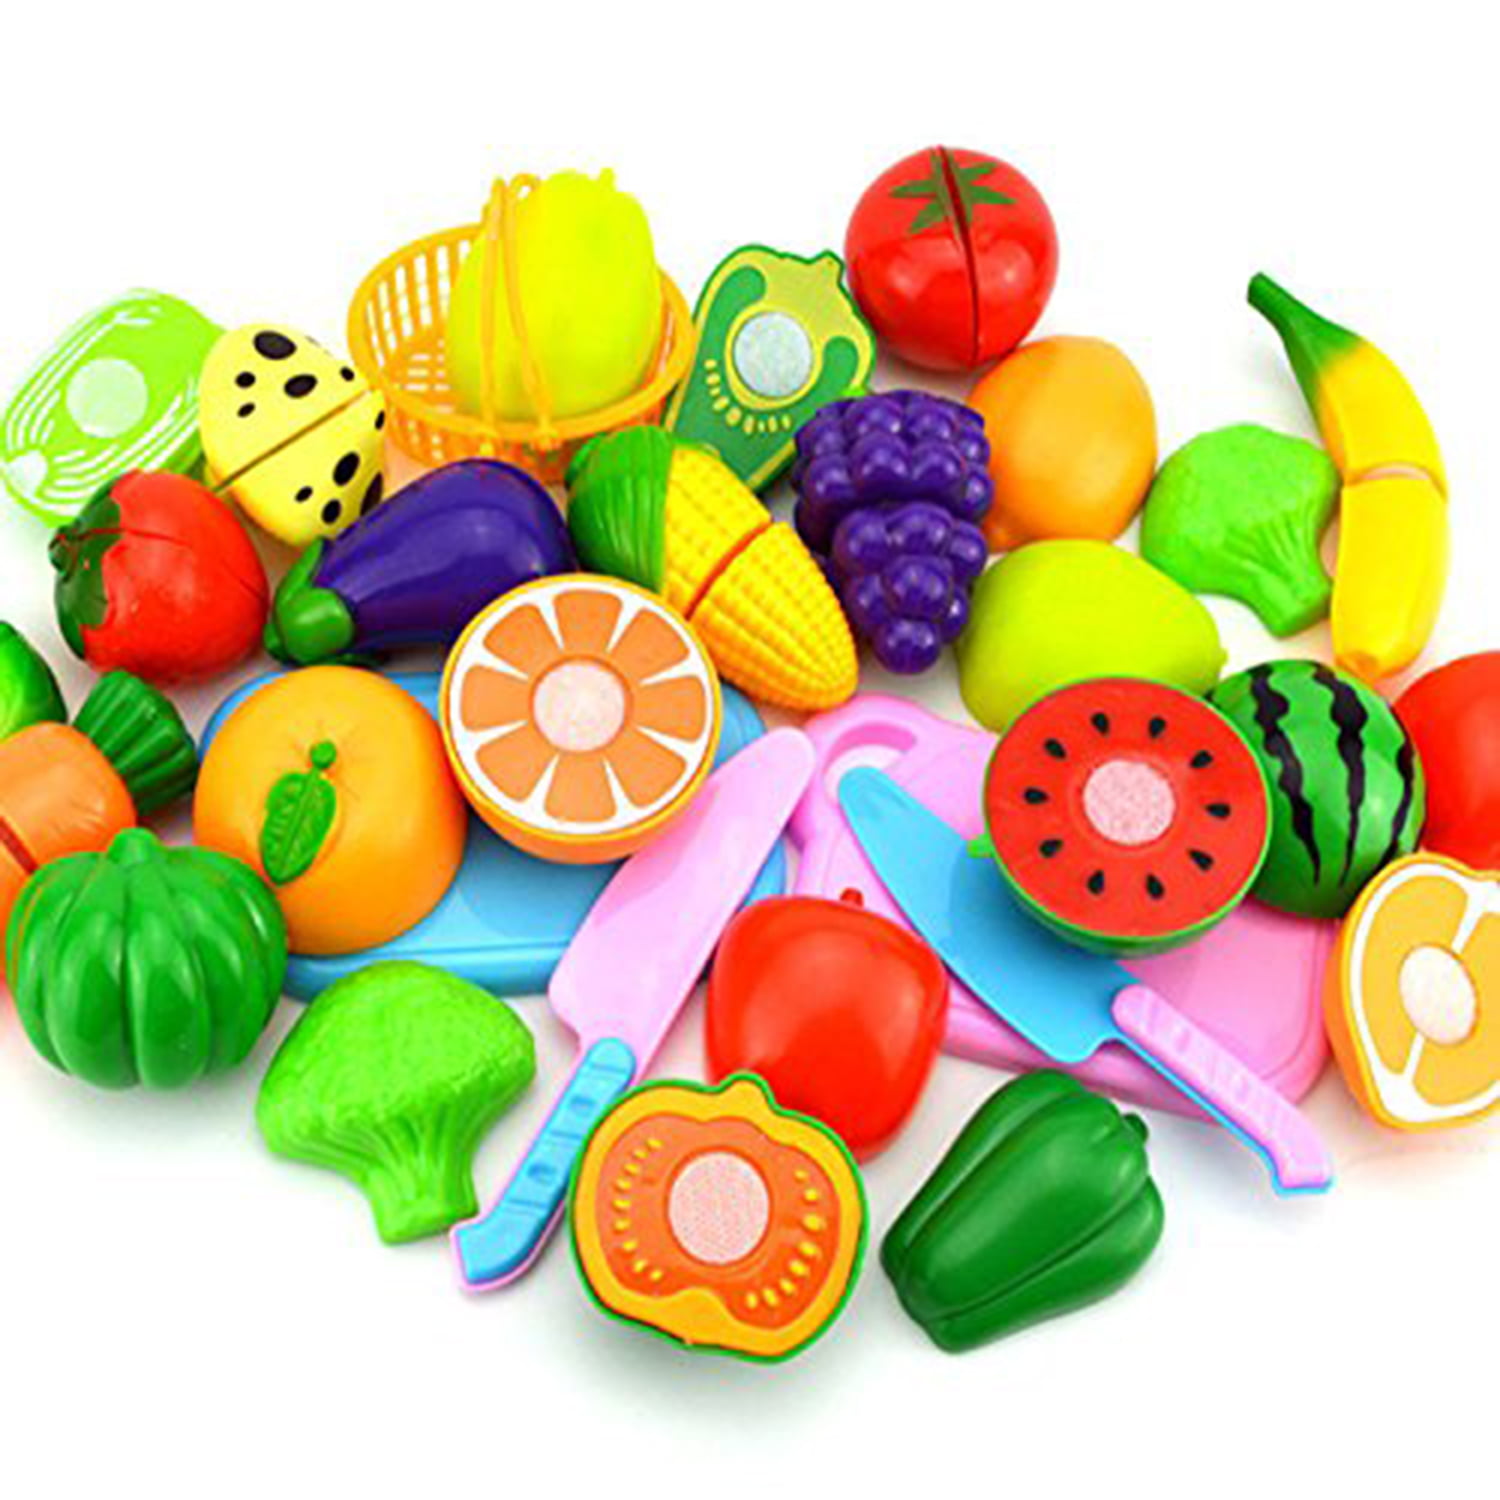 Toy Play Fruit Food Pretend Vegetable Kitchen Cutting Set Role Kids Child GR G1 